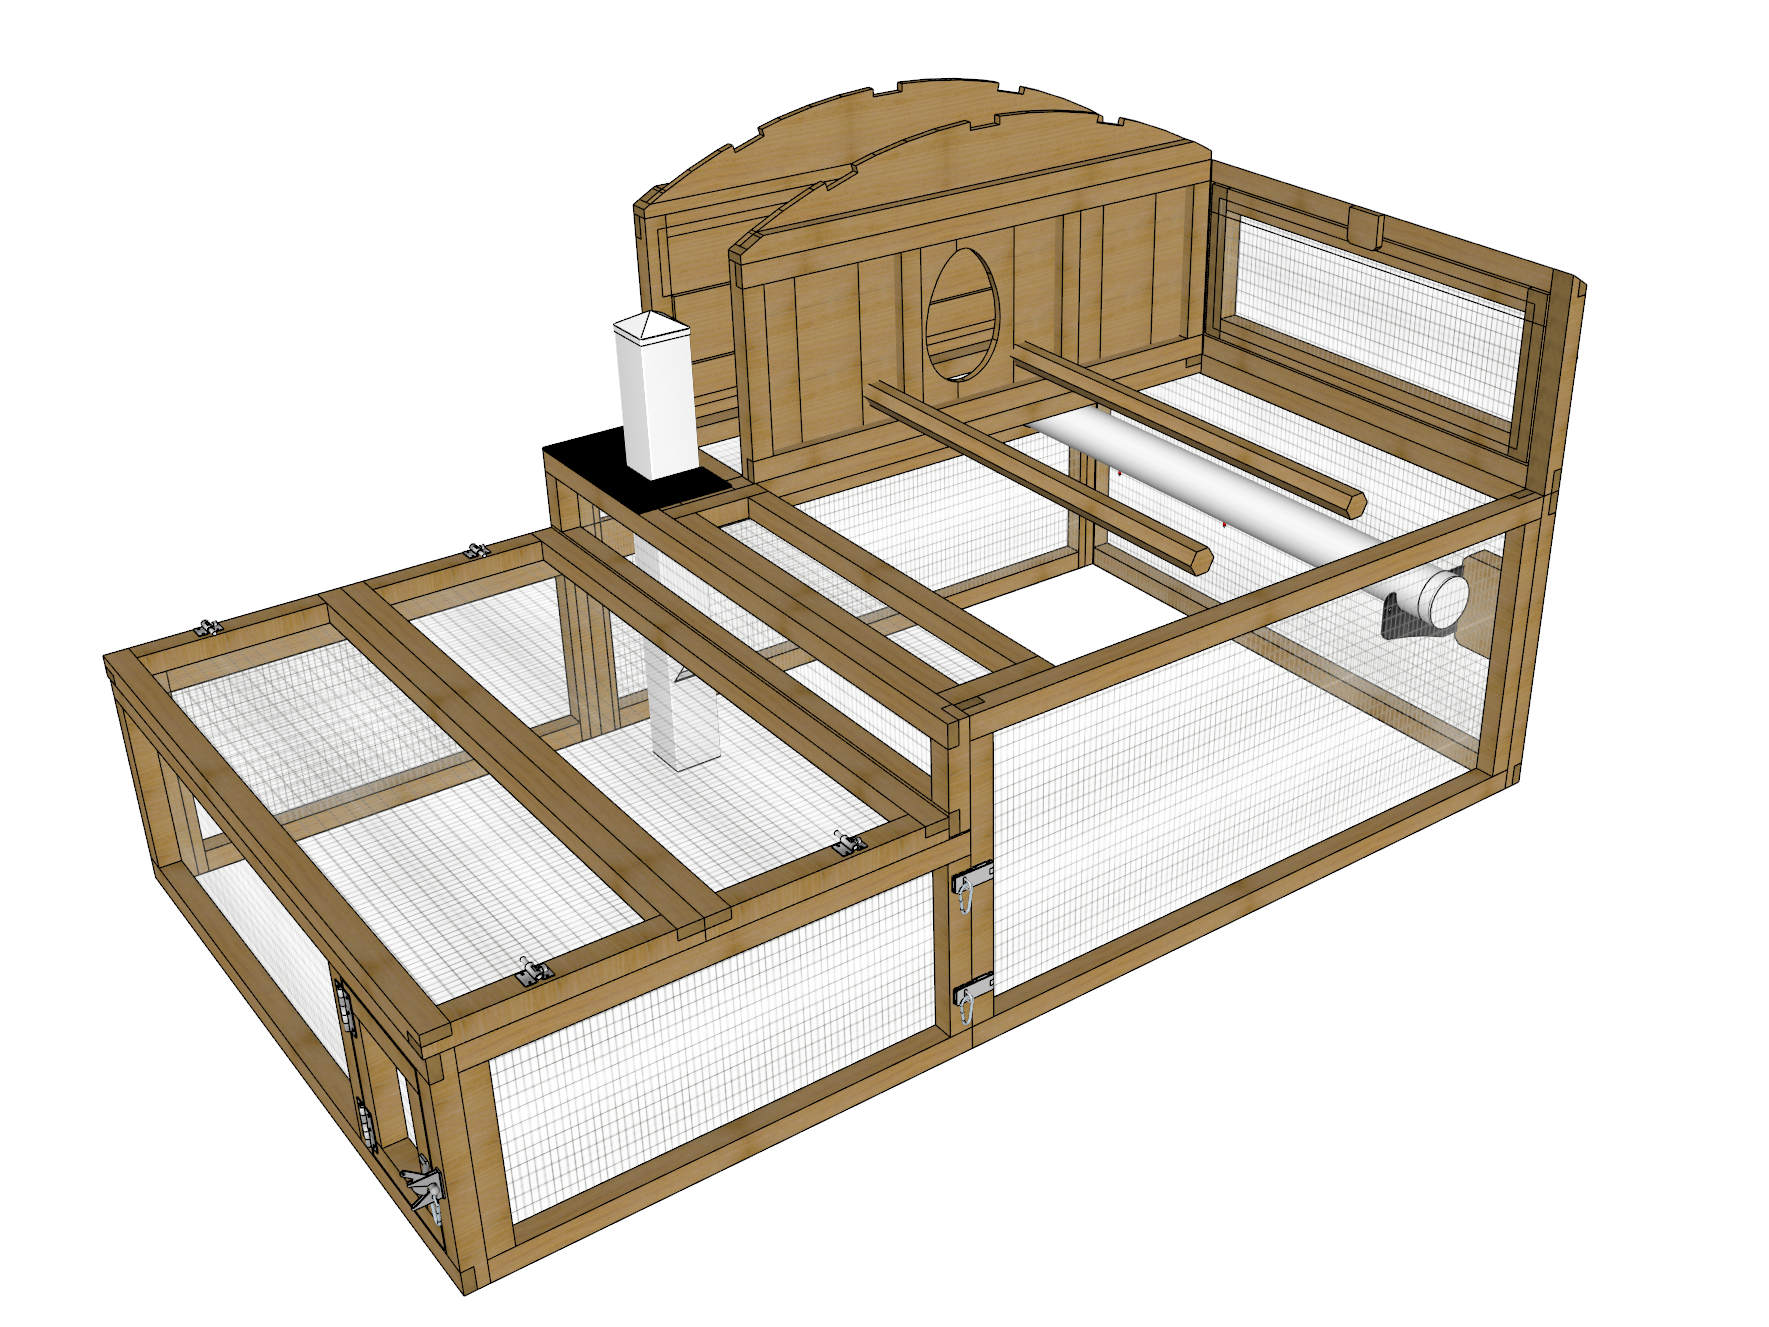 CAD Photo of The All New Backyard XL Chicken Coop Model 2